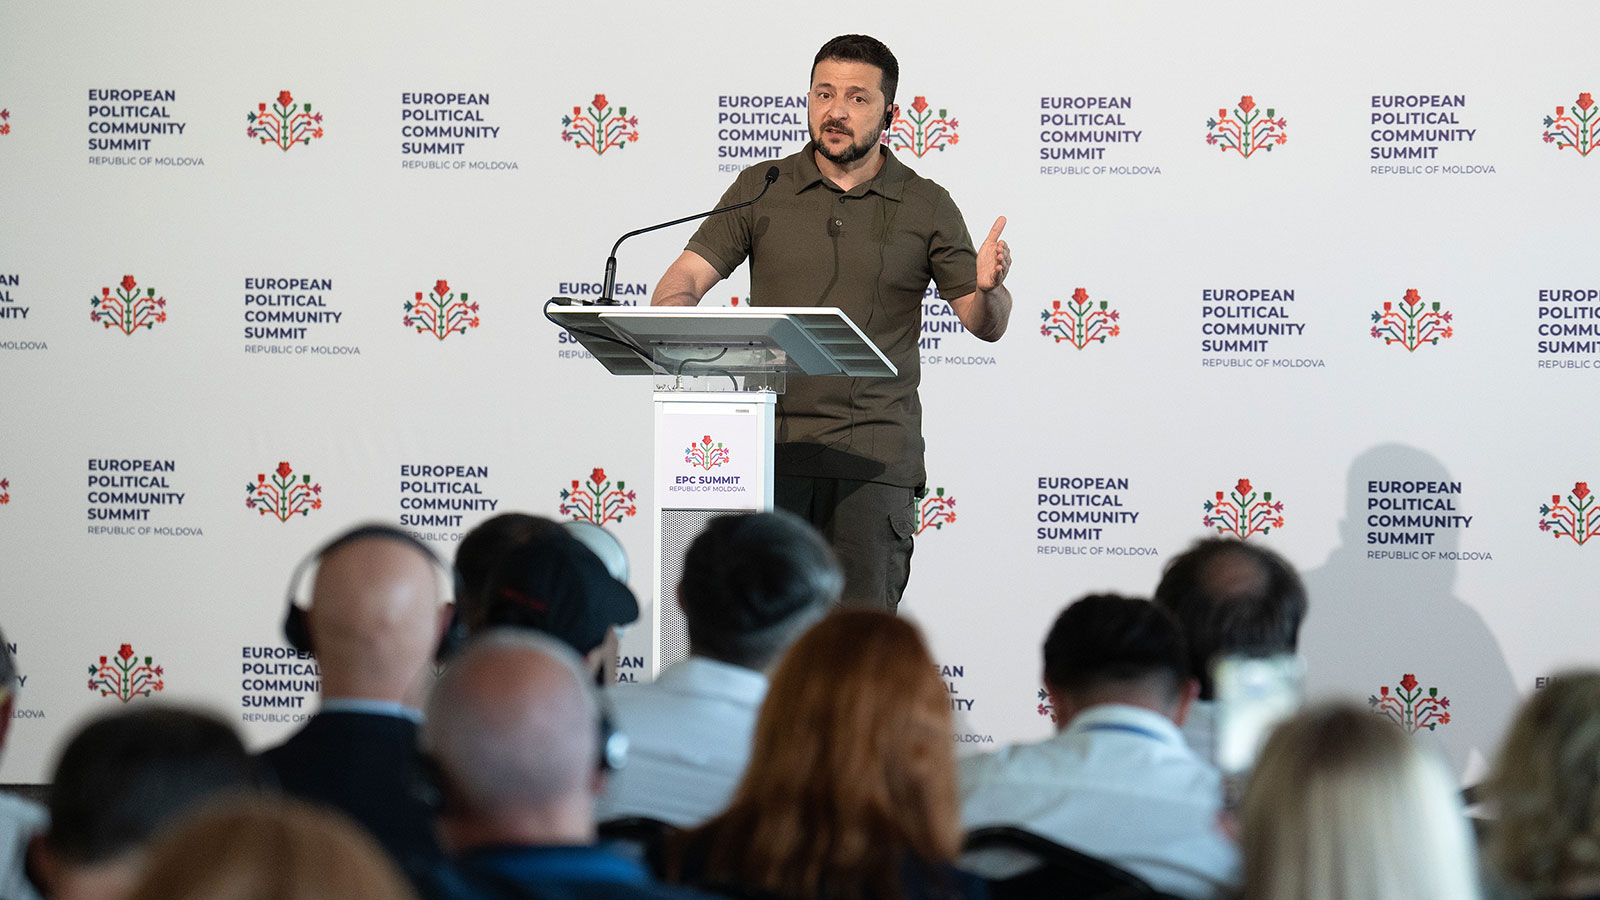 Zelenskyy speaks during a press conference at the European Political Community Summit in Bulboaca, Moldova, on Thursday,  June 1.